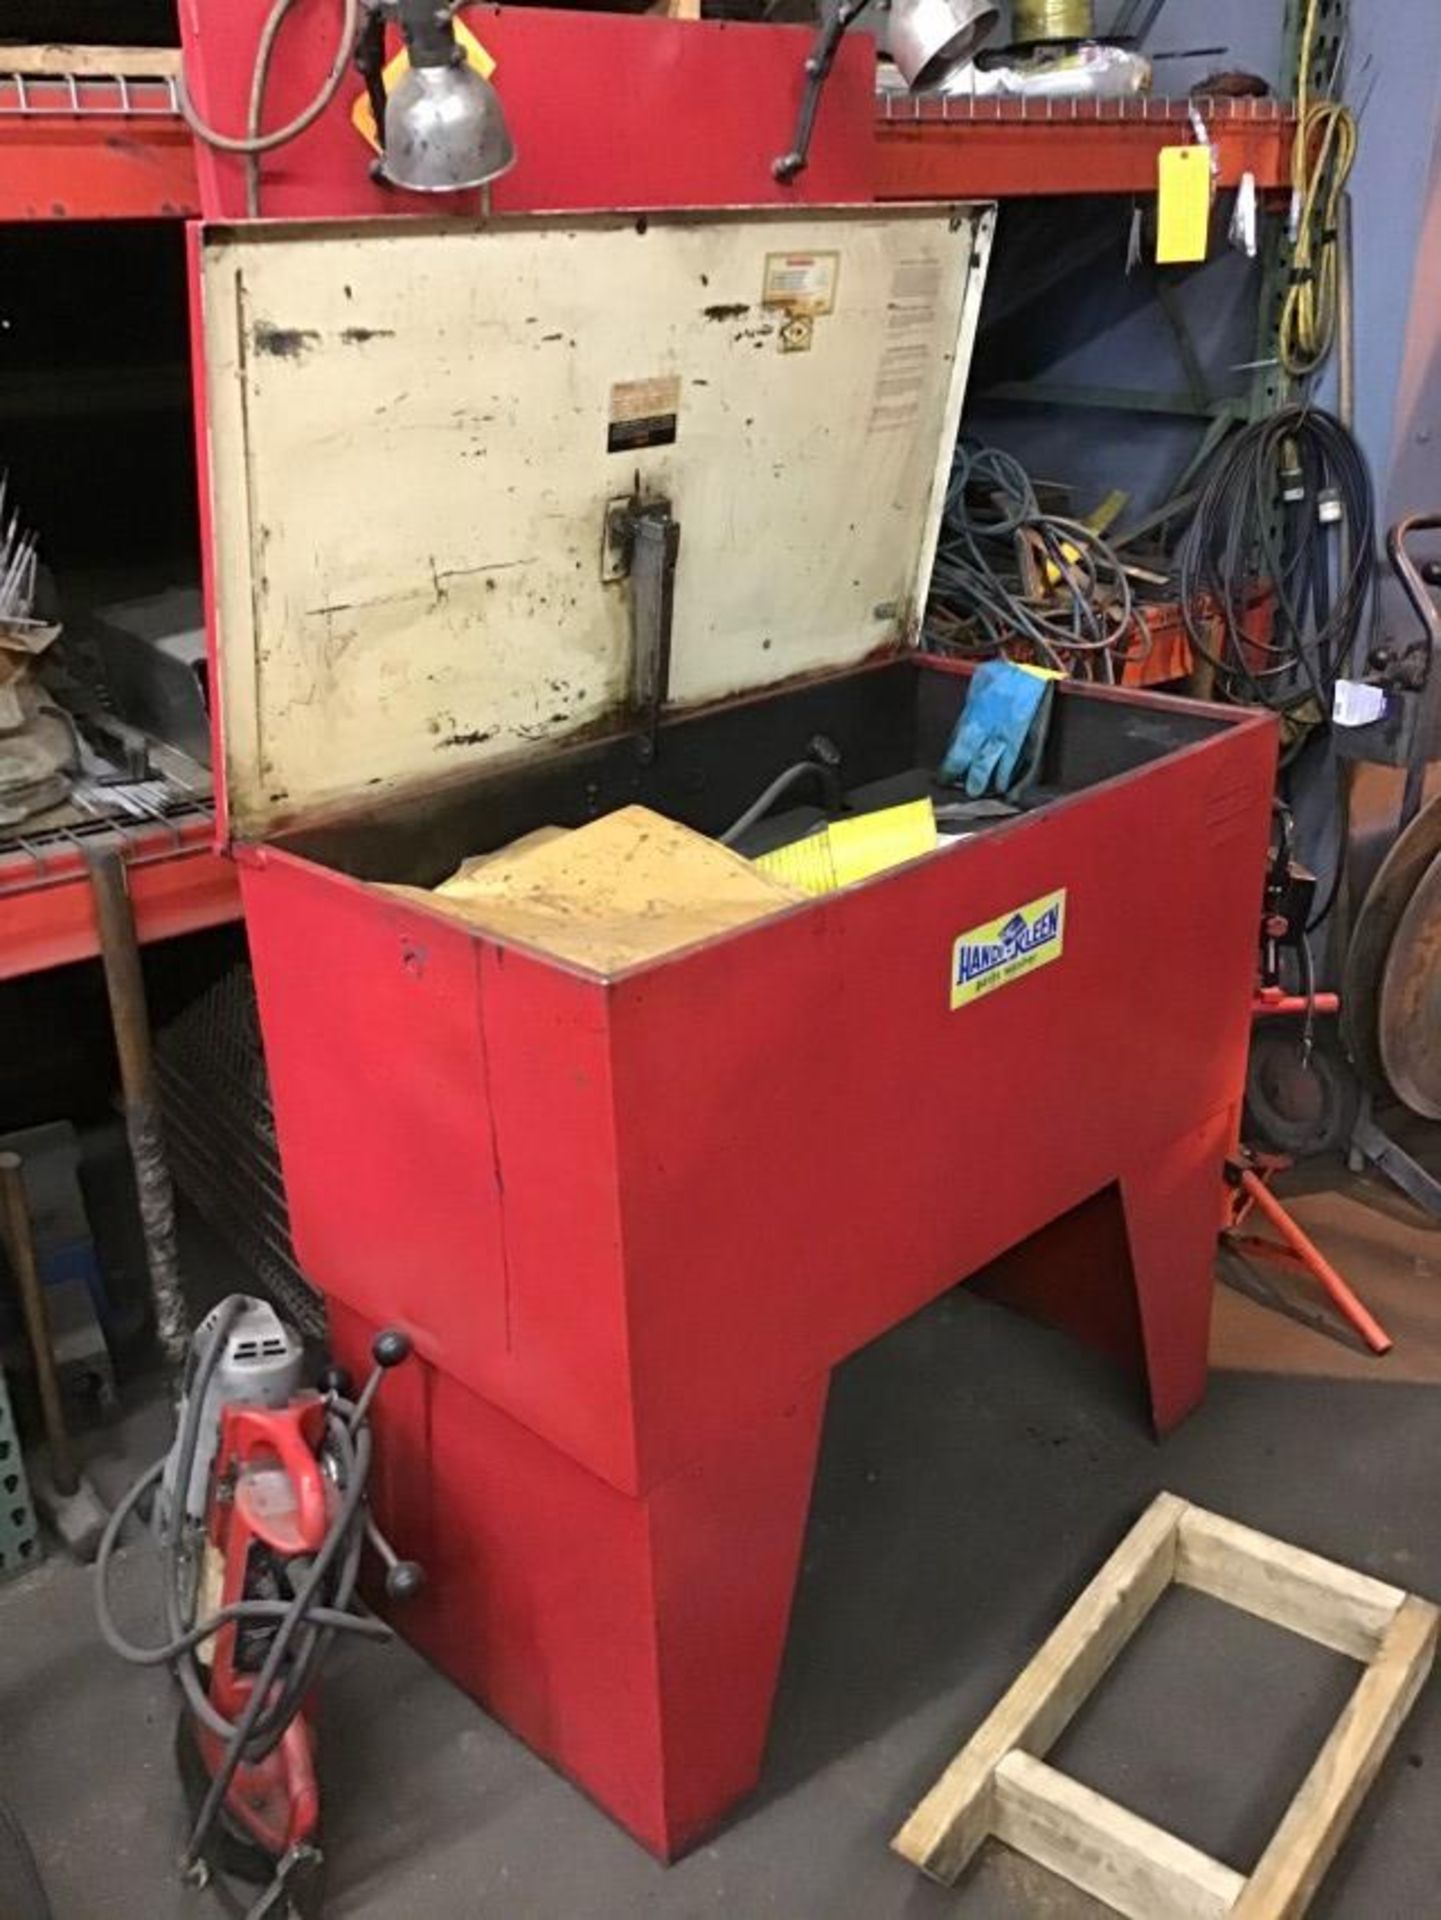 Parts Washer, Rated Capacity 42 Gal (300 Lbs), Tank Dimensions 36" x 22" x 28" [PITTSBURGH, PA] - Image 2 of 3